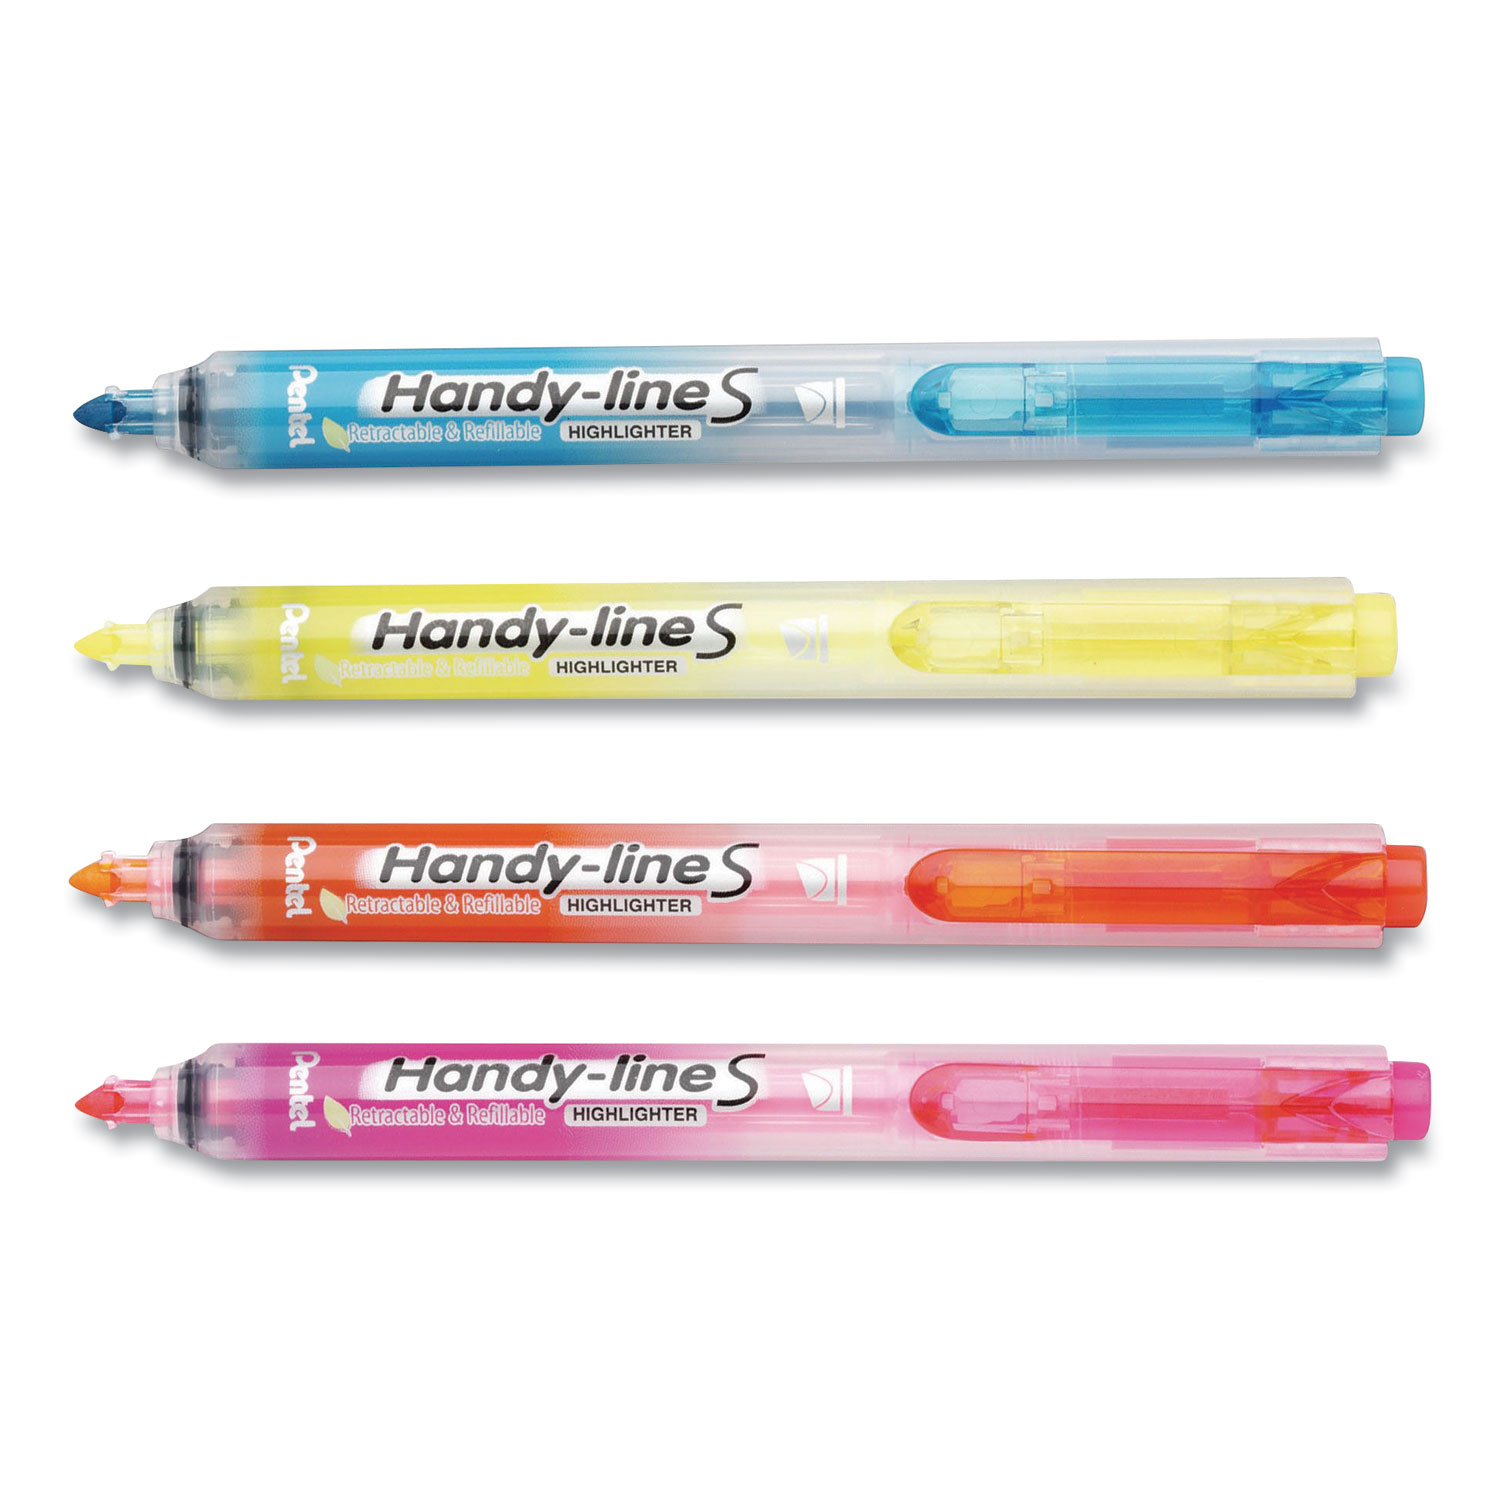 Pentel® Handy-line S Retractable and Refillable Highlighters, Ultra-Slim Barrel, Chisel Tip, Assorted Colors, 4/Pack